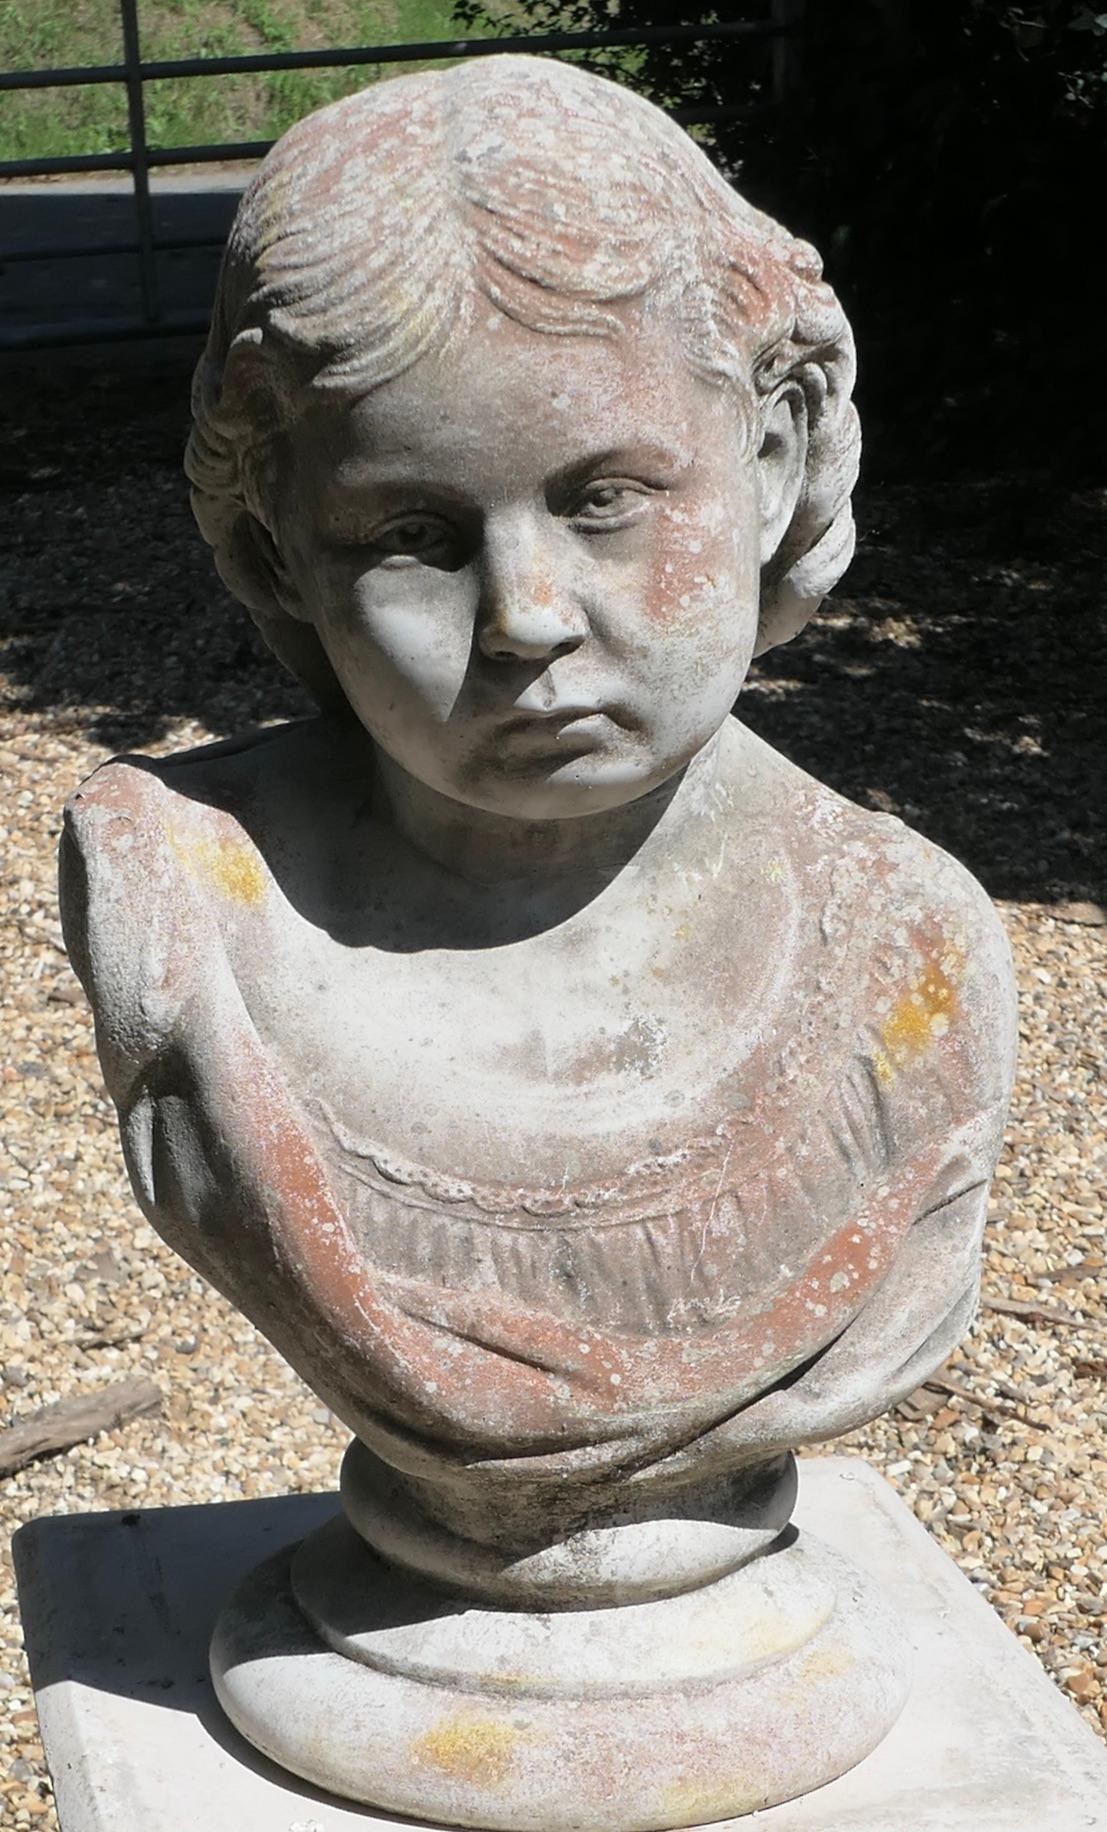  Head and Shoulder Bust of a Young Girl Garden Statue
This is a charming detailed bust of a rather wistful young girl, note the folds of her dress and the ringlets of her hair
The Statue is nicely weathered it is 20” tall and 12” x 9”
SW133